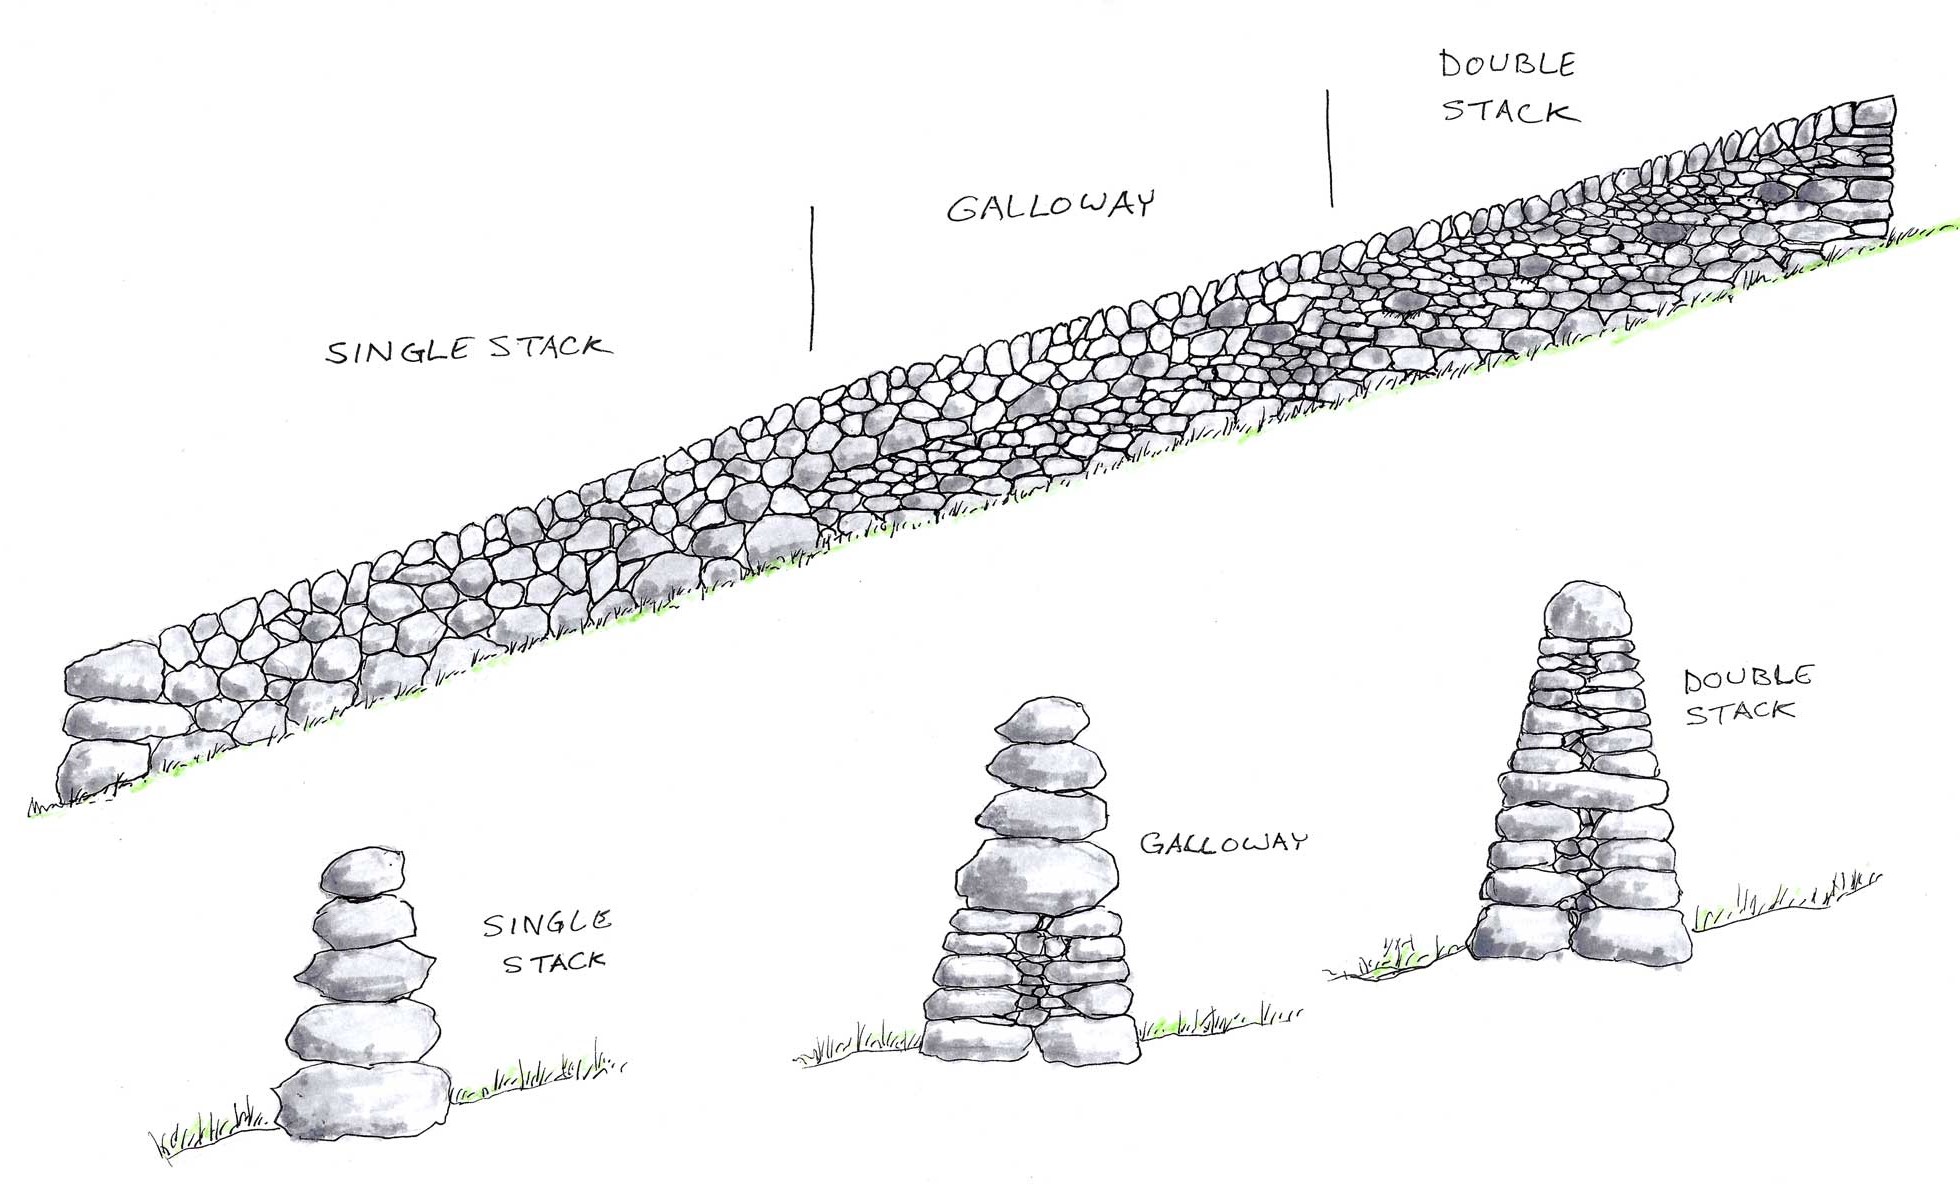 Common Styles of Traditional dry stone walls, freestanding walls, and retaining walls